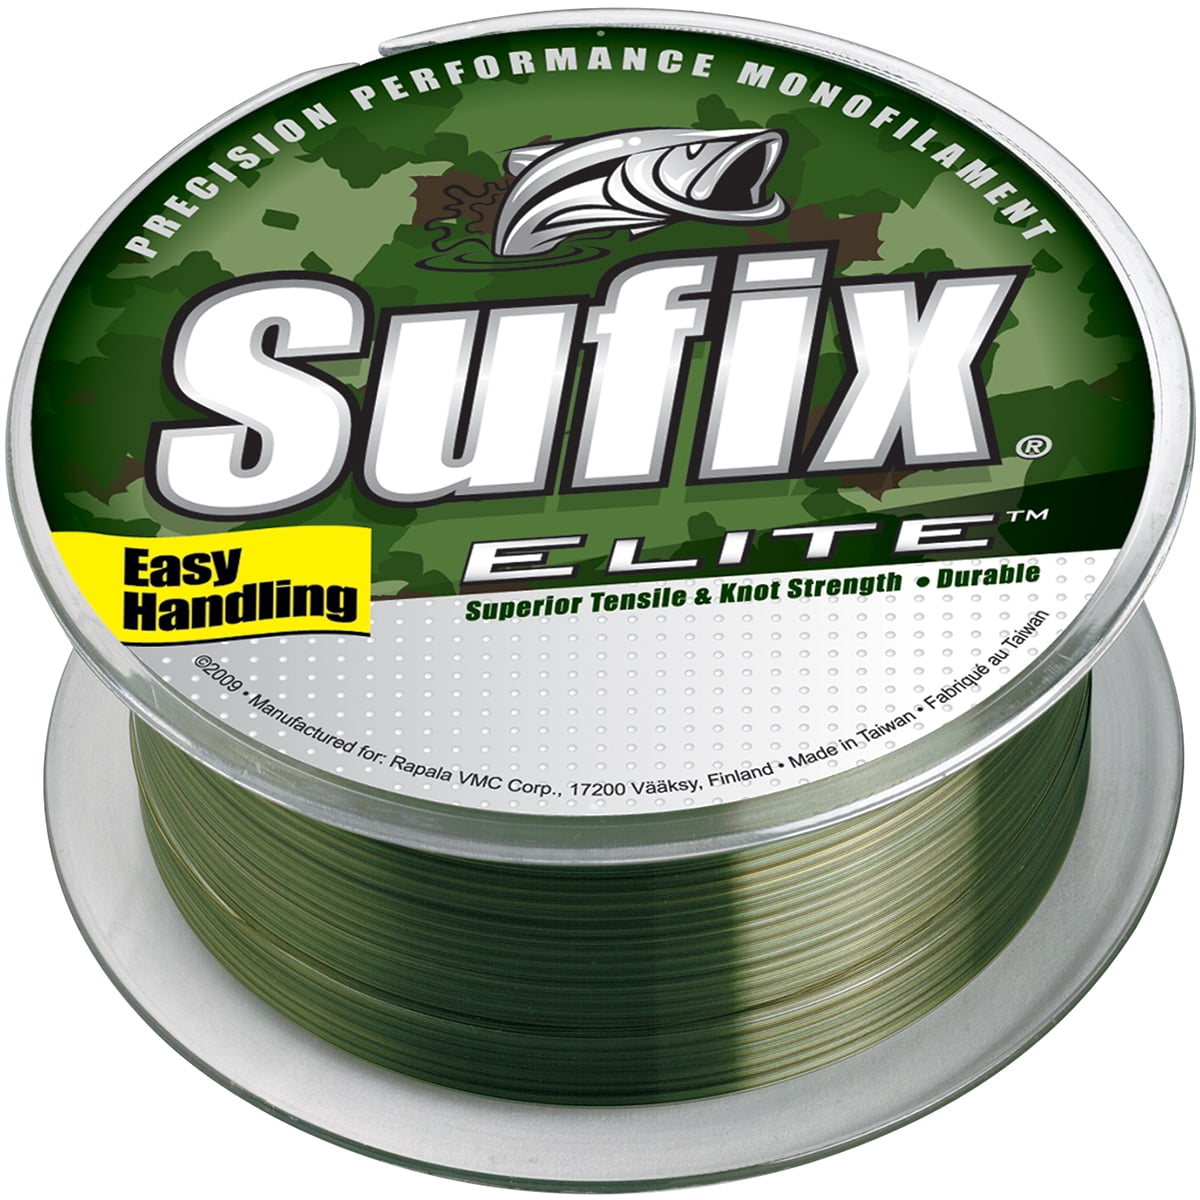 Berkley Trilene Big Game 60 lb. 235yards Monofilament Fishing Line - Green  - Go2 Outfitters